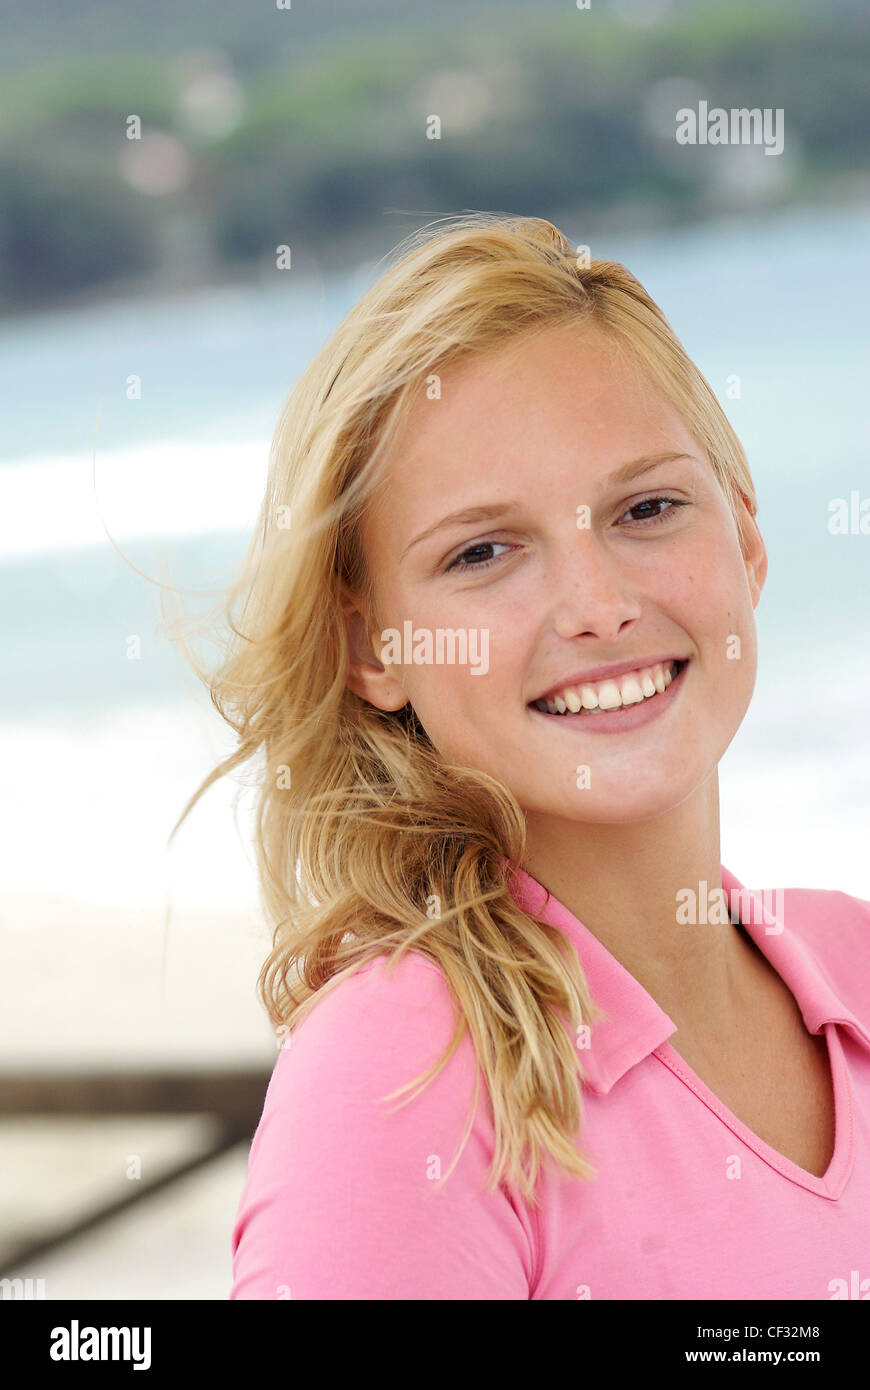 Female With Long Blonde Hair Wearing A Pink Top And Natural Make